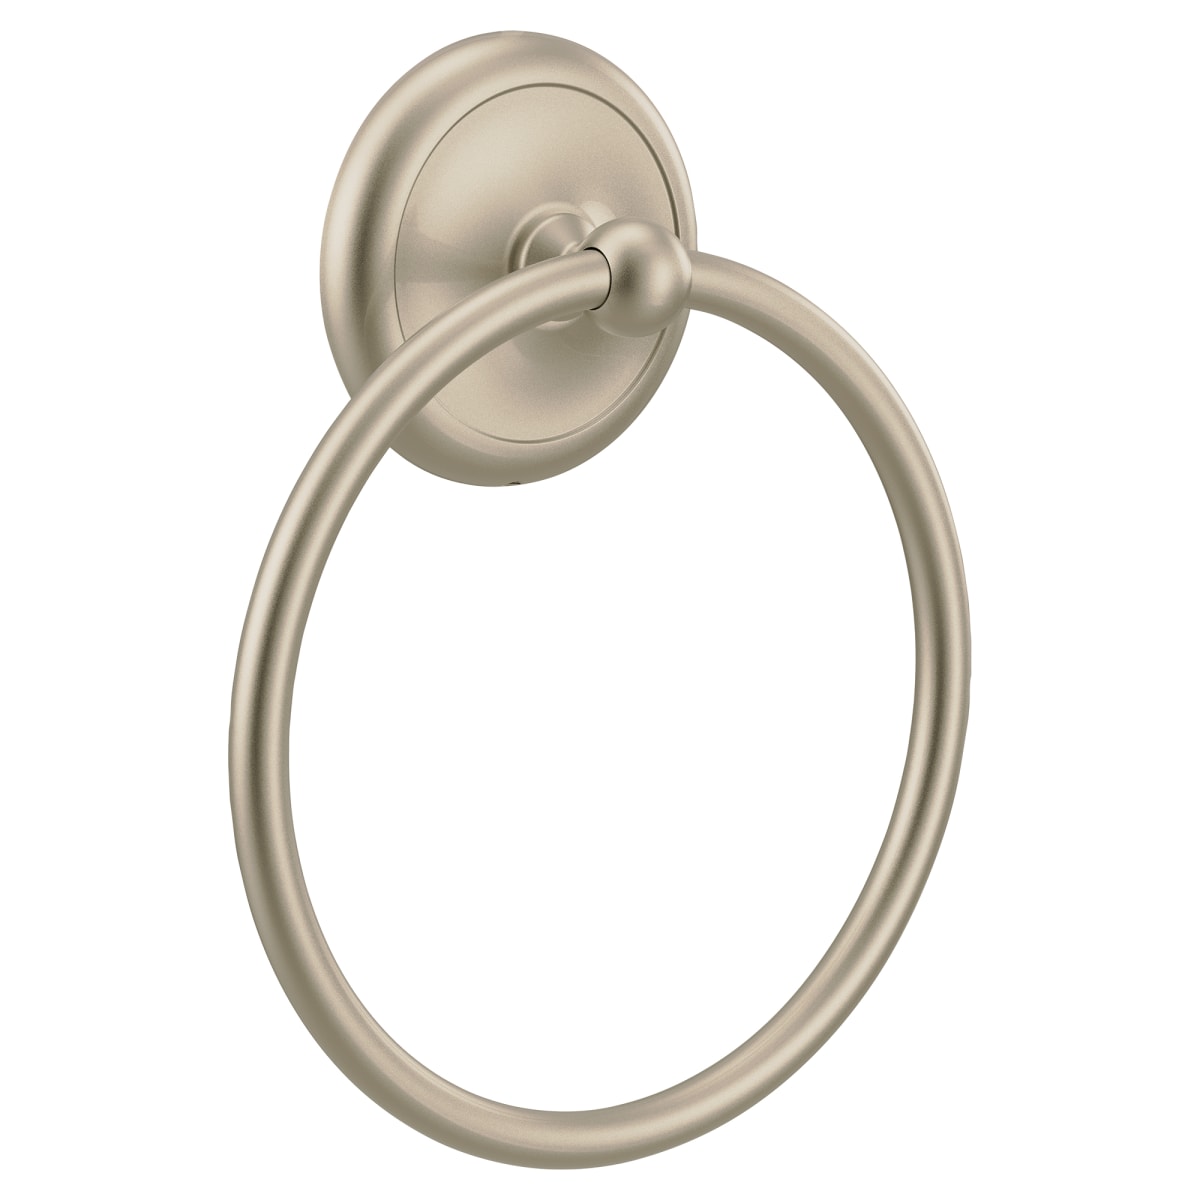 Moen 5386 Chrome Towel Ring From The Yorkshire Collection 